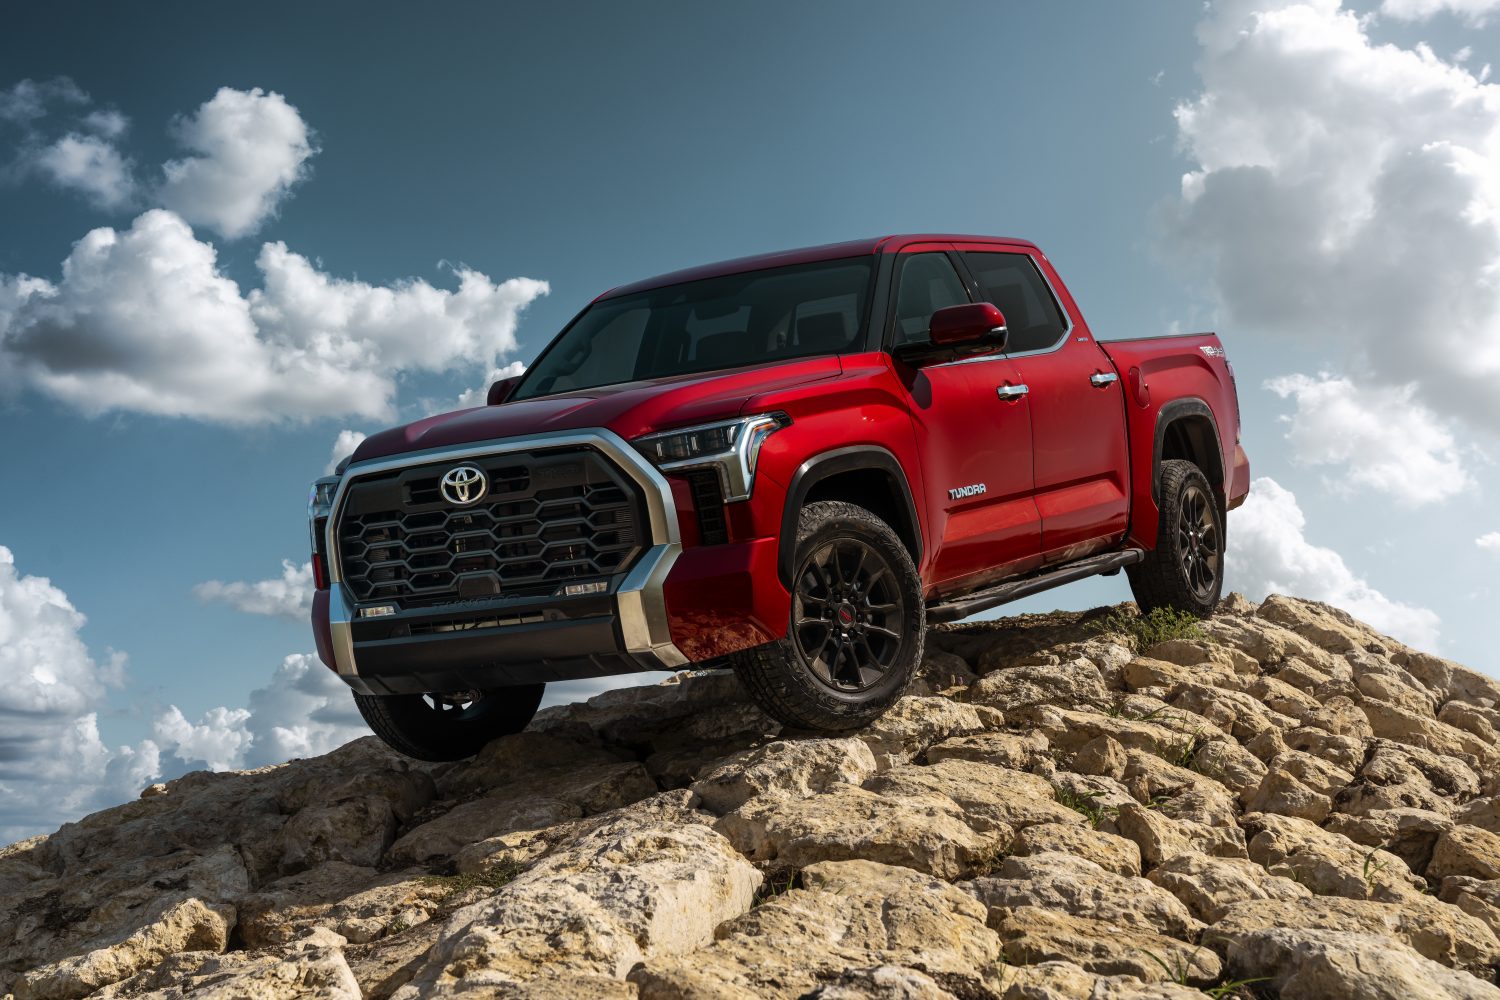 The 2022 Toyota Tundra has a recall due to separating axles